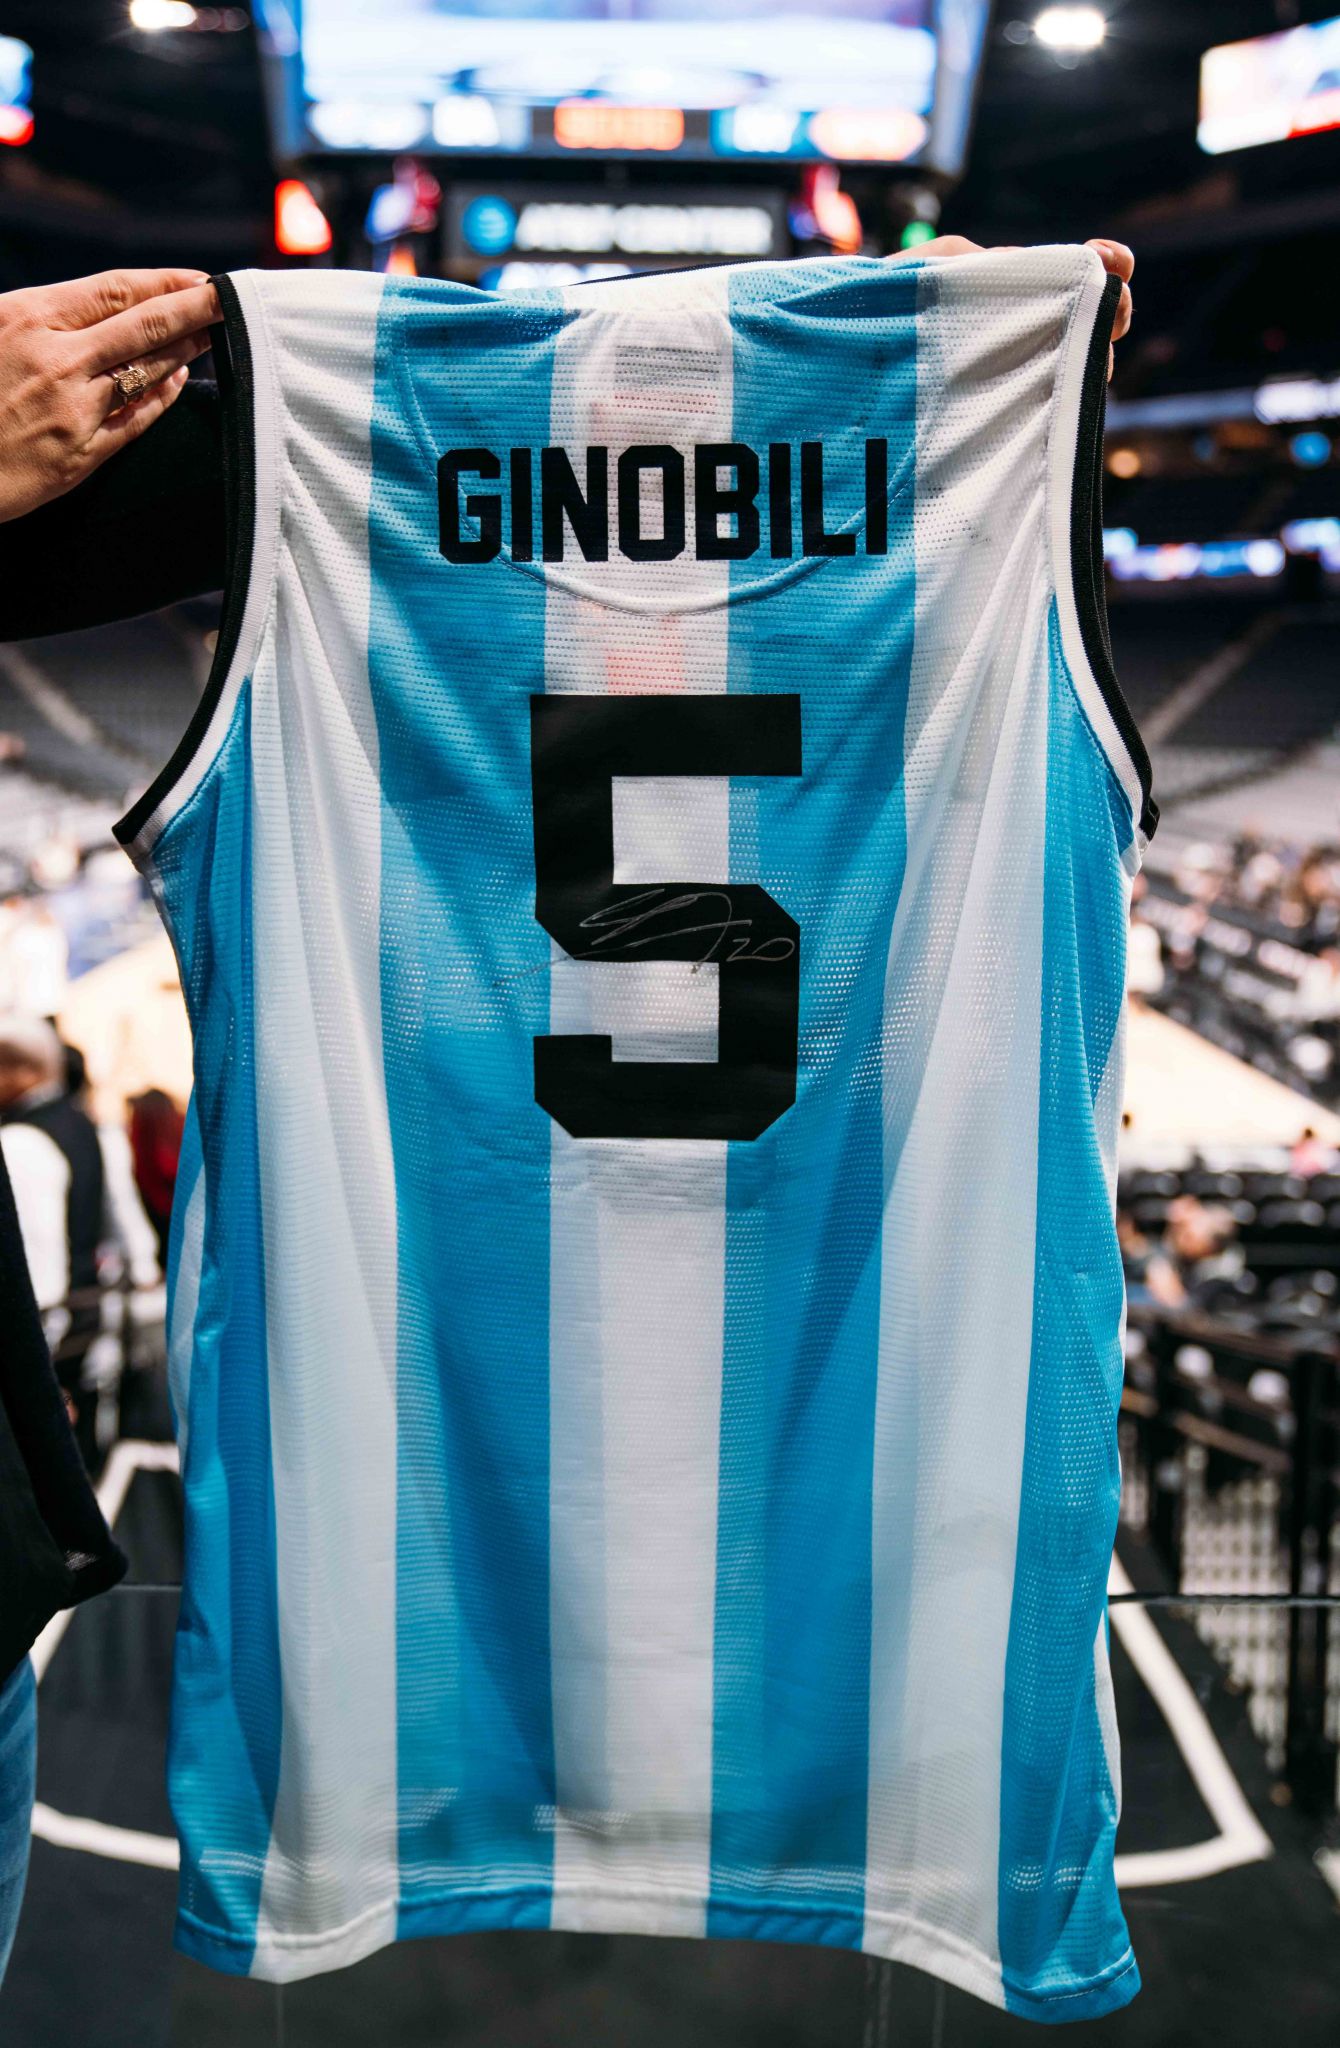 Recapping Manu Ginobili's jersey retirement, which wasn't always a